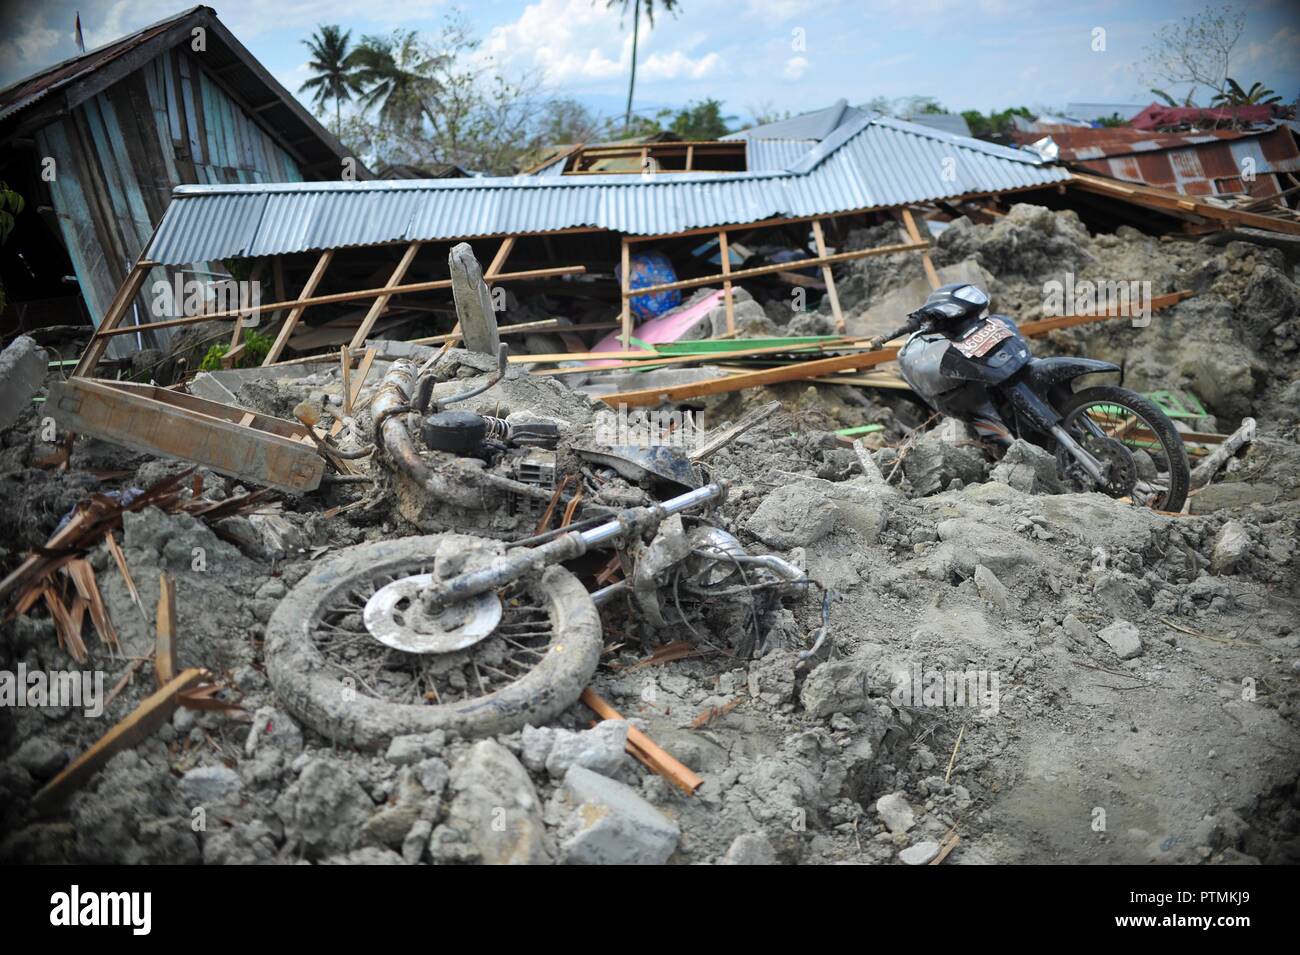 Poso, Indonesia. 9th Oct, 2018. Debries are seen in Poso, Central Sulawesi Province, Indonesia, on Oct. 9, 2018. The earthquakes and the tsunami have killed at least 2,010 people, left over 5,000 others missing and triggered massive damage and a huge evacuation, according to the national disaster management agency. Credit: Zulkarnain/Xinhua/Alamy Live News Stock Photo